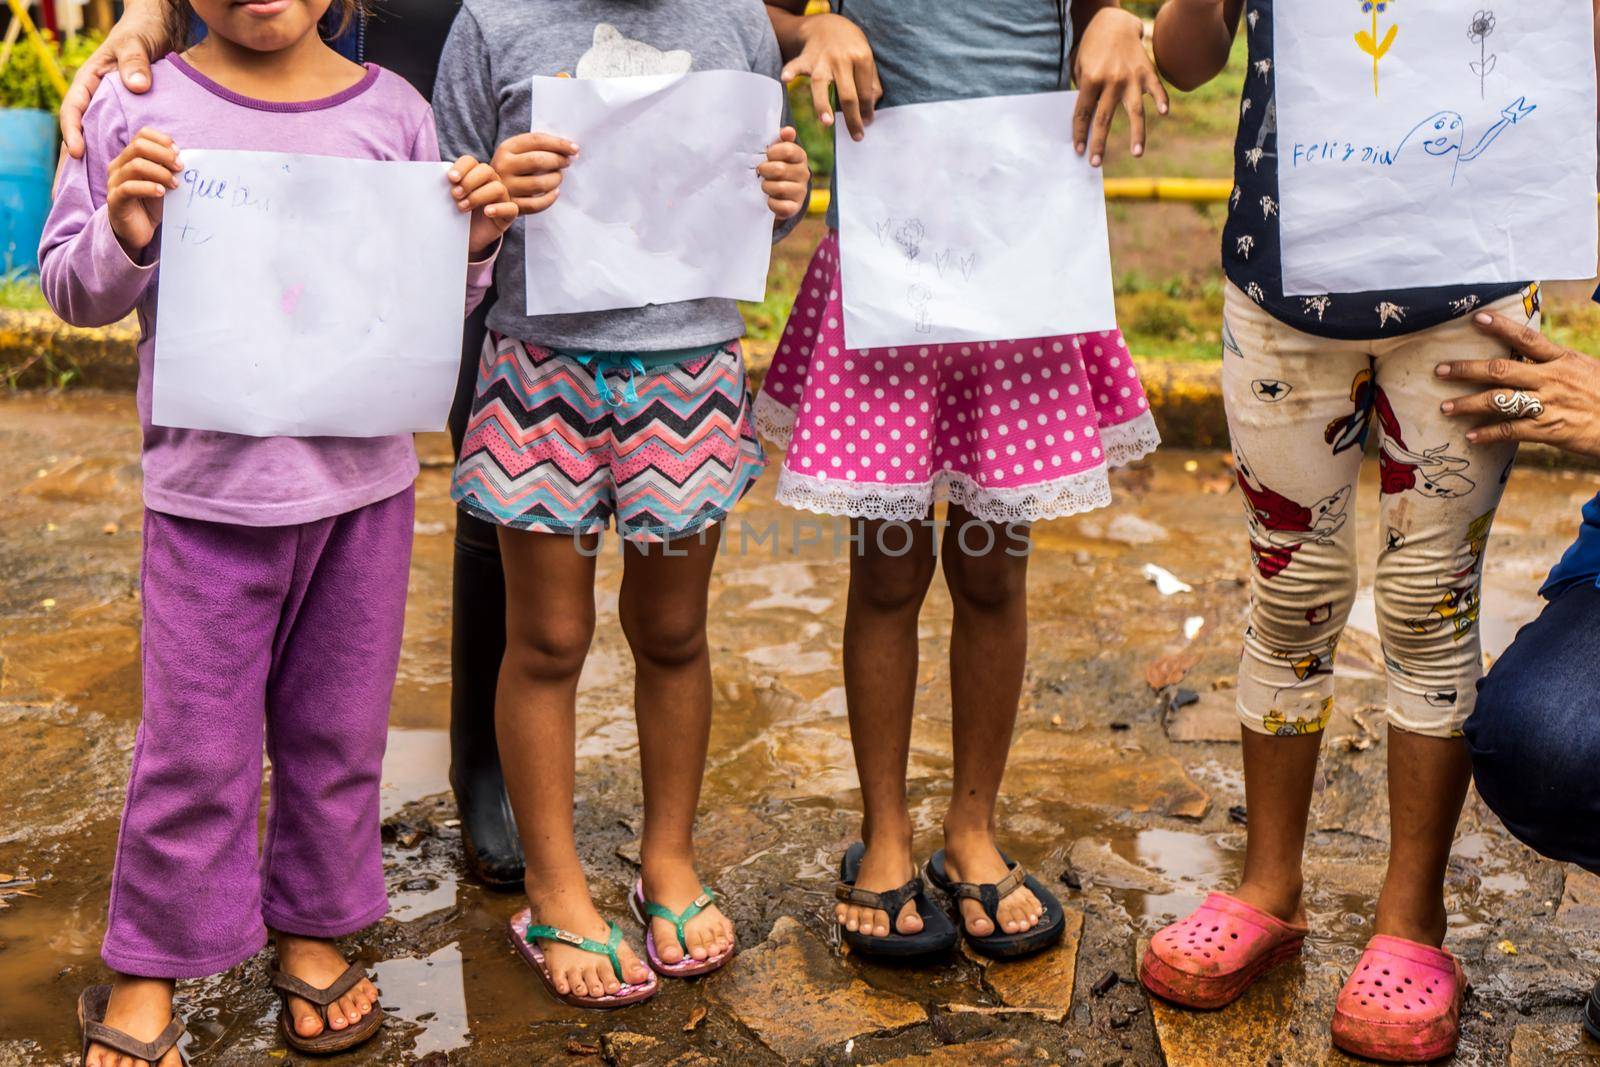 Group of dabnified children showing blank papers where they drew pictures in El Rama, Nicaragua